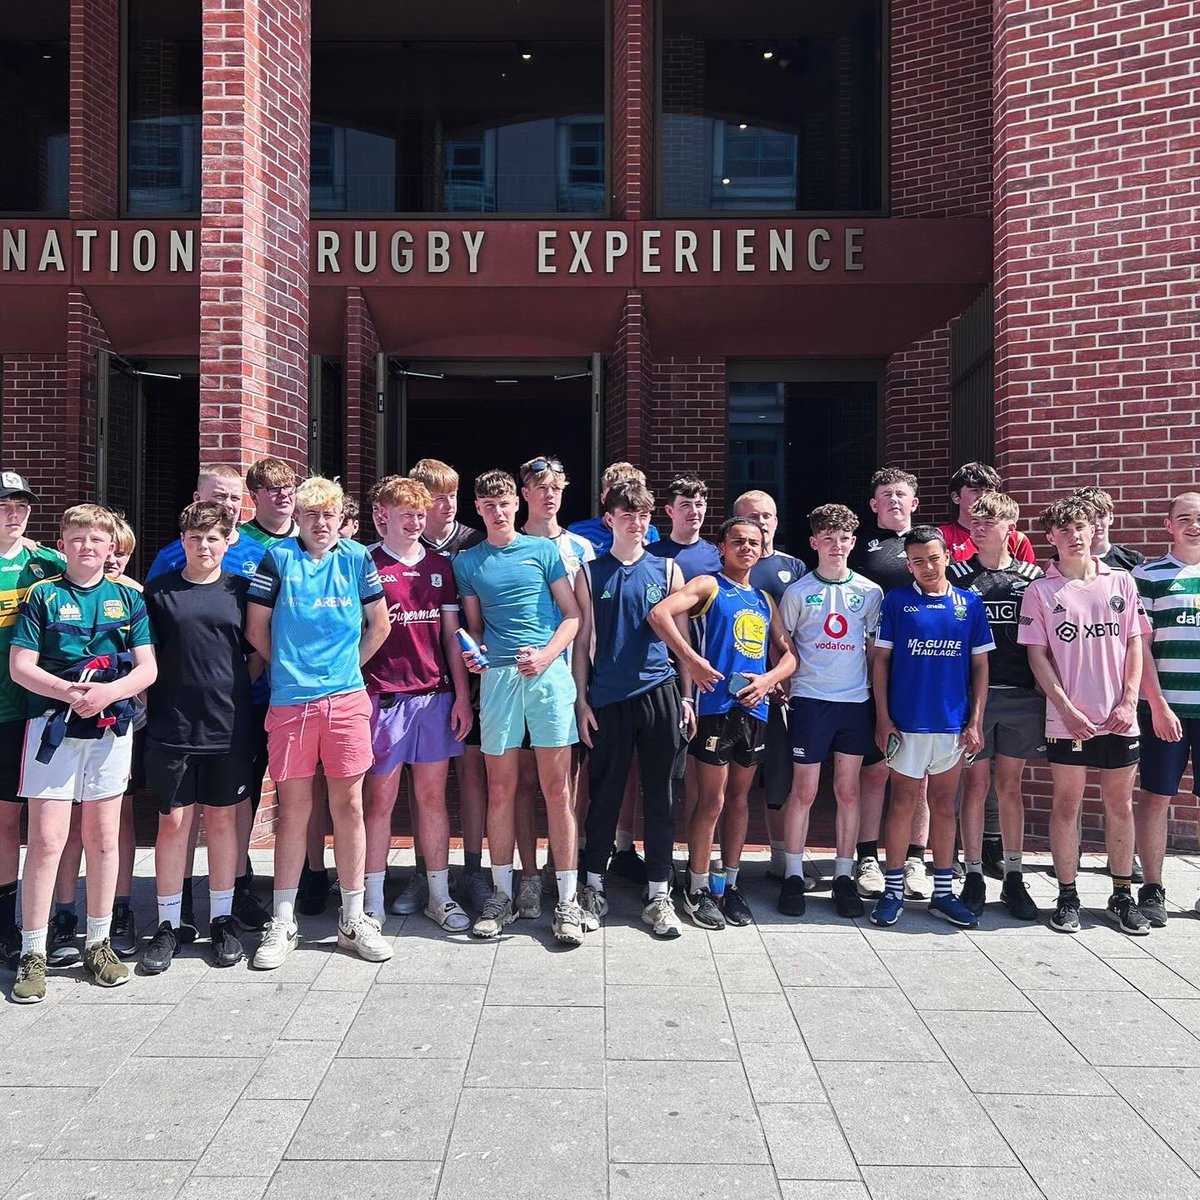 A fun day welcoming clubs and fans to the #HomeofLegends on their way to @thomondstadium for @Munsterrugby v @connachtrugby #estuaryrfc @KilfeacleRFC @KilkennyRFC #Limerick #Rugby #munstervconnacht #Interactiveexperience #familyfun #teambuilding